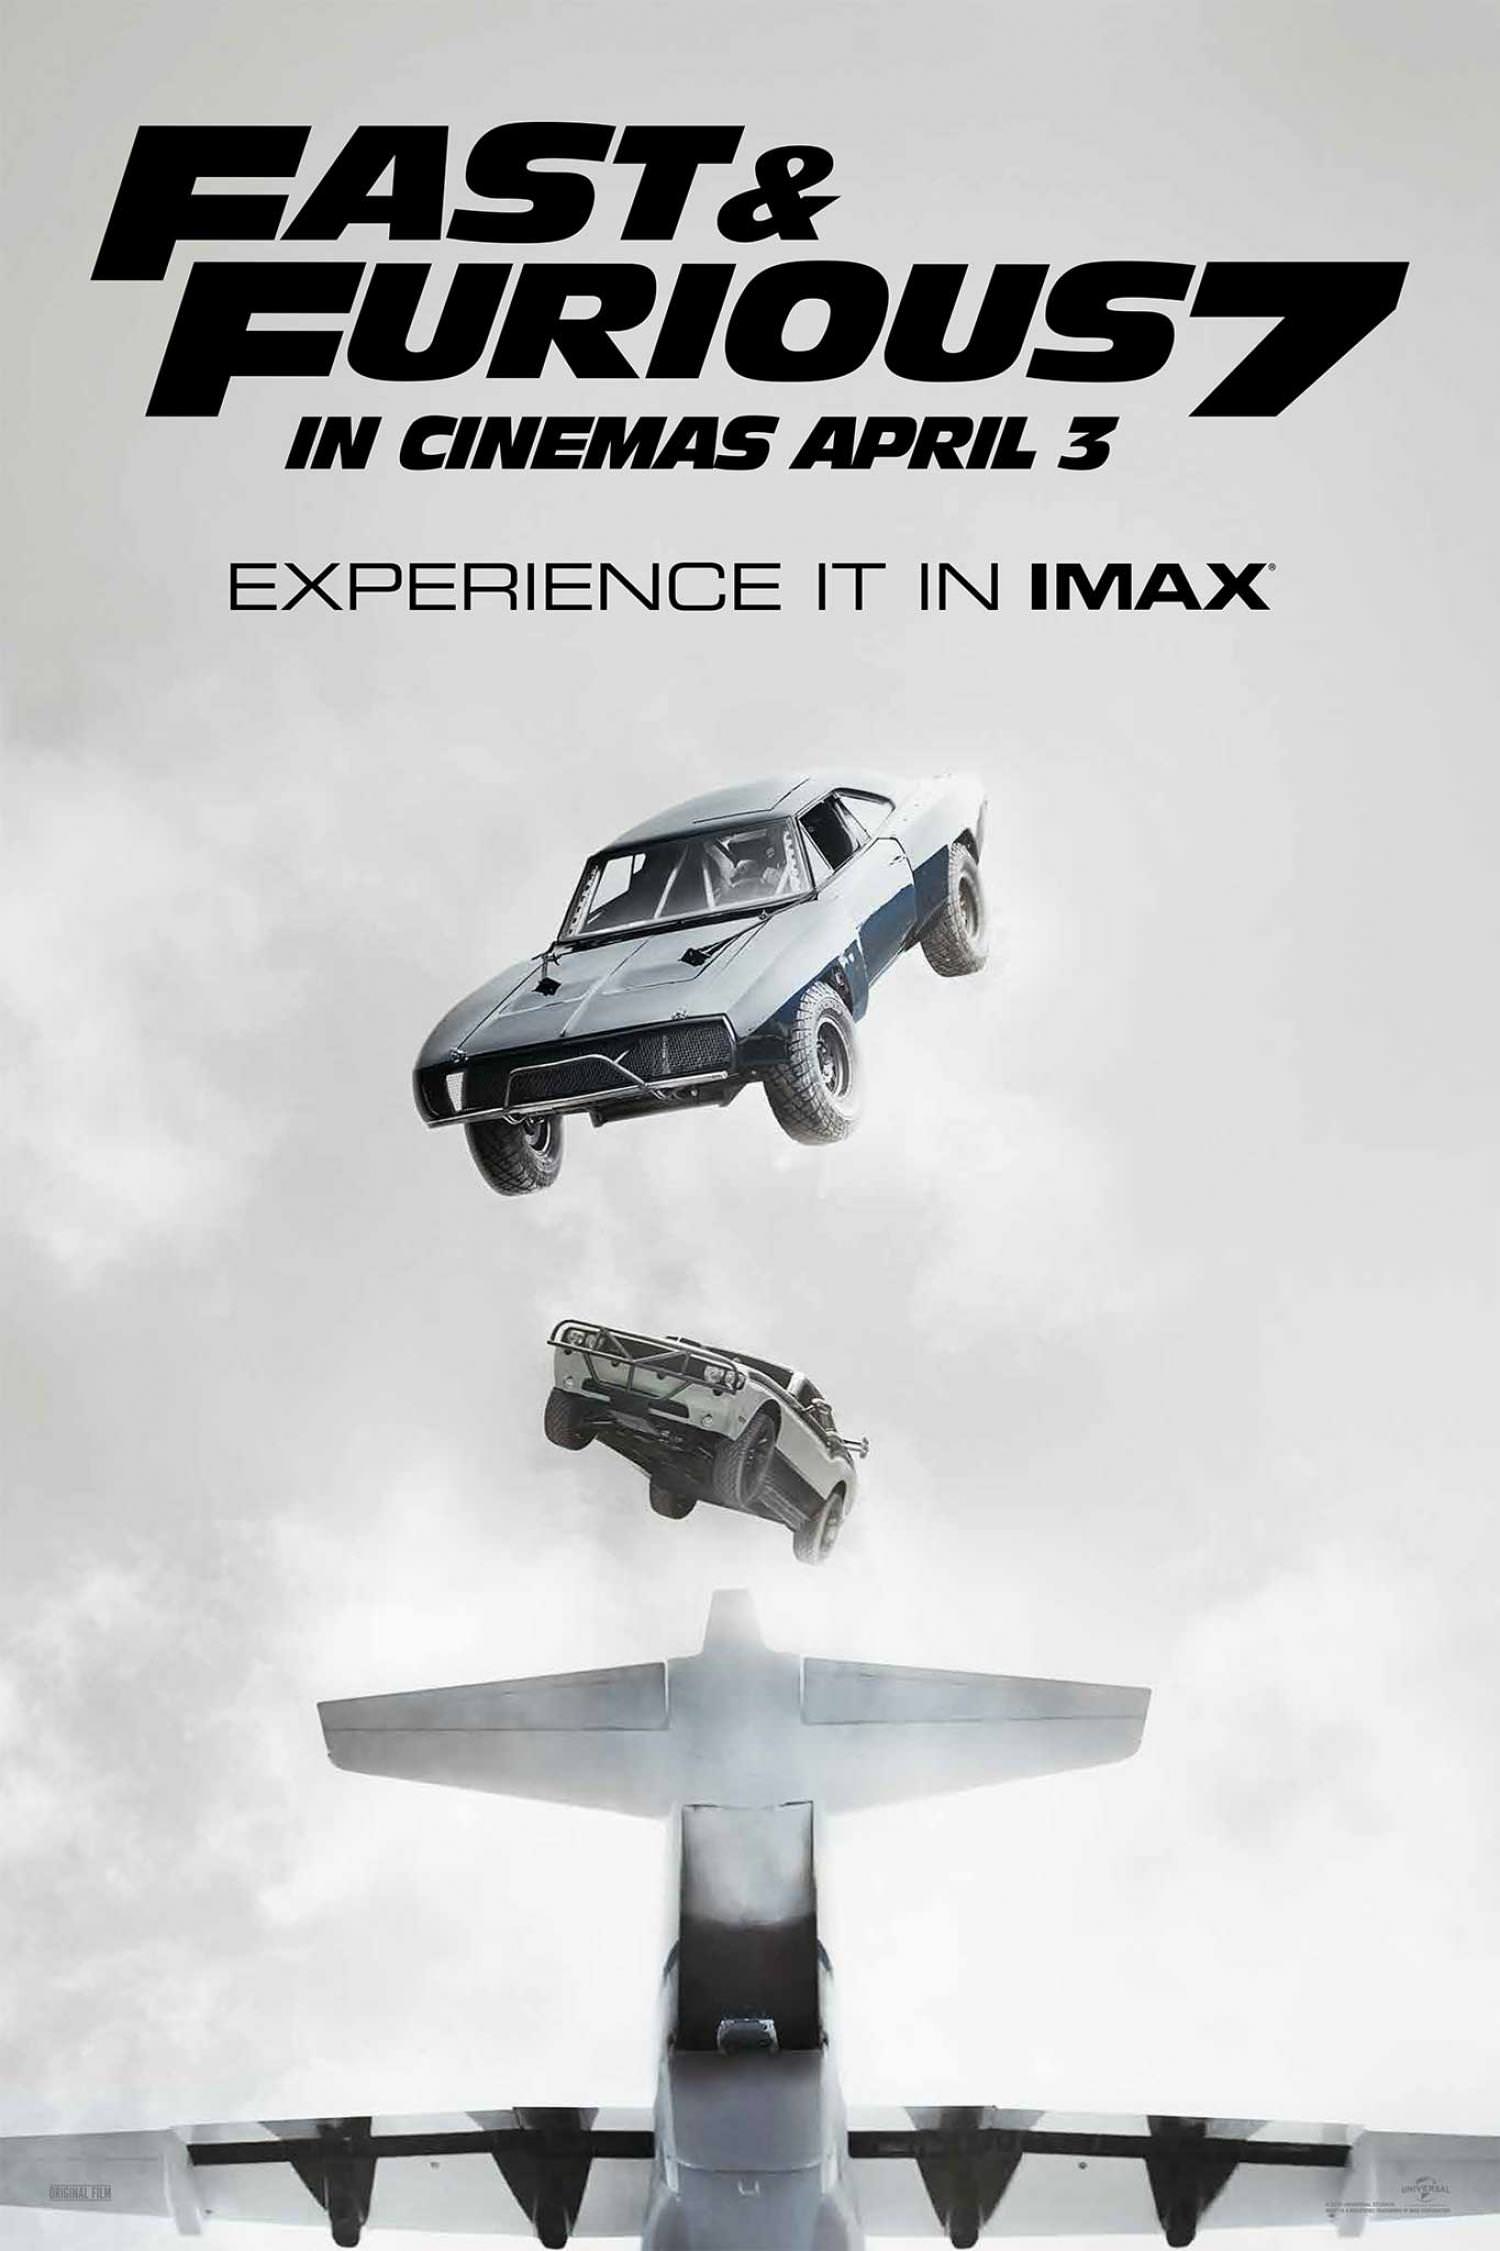 fastandfurious_poster_20150330_2047x1365